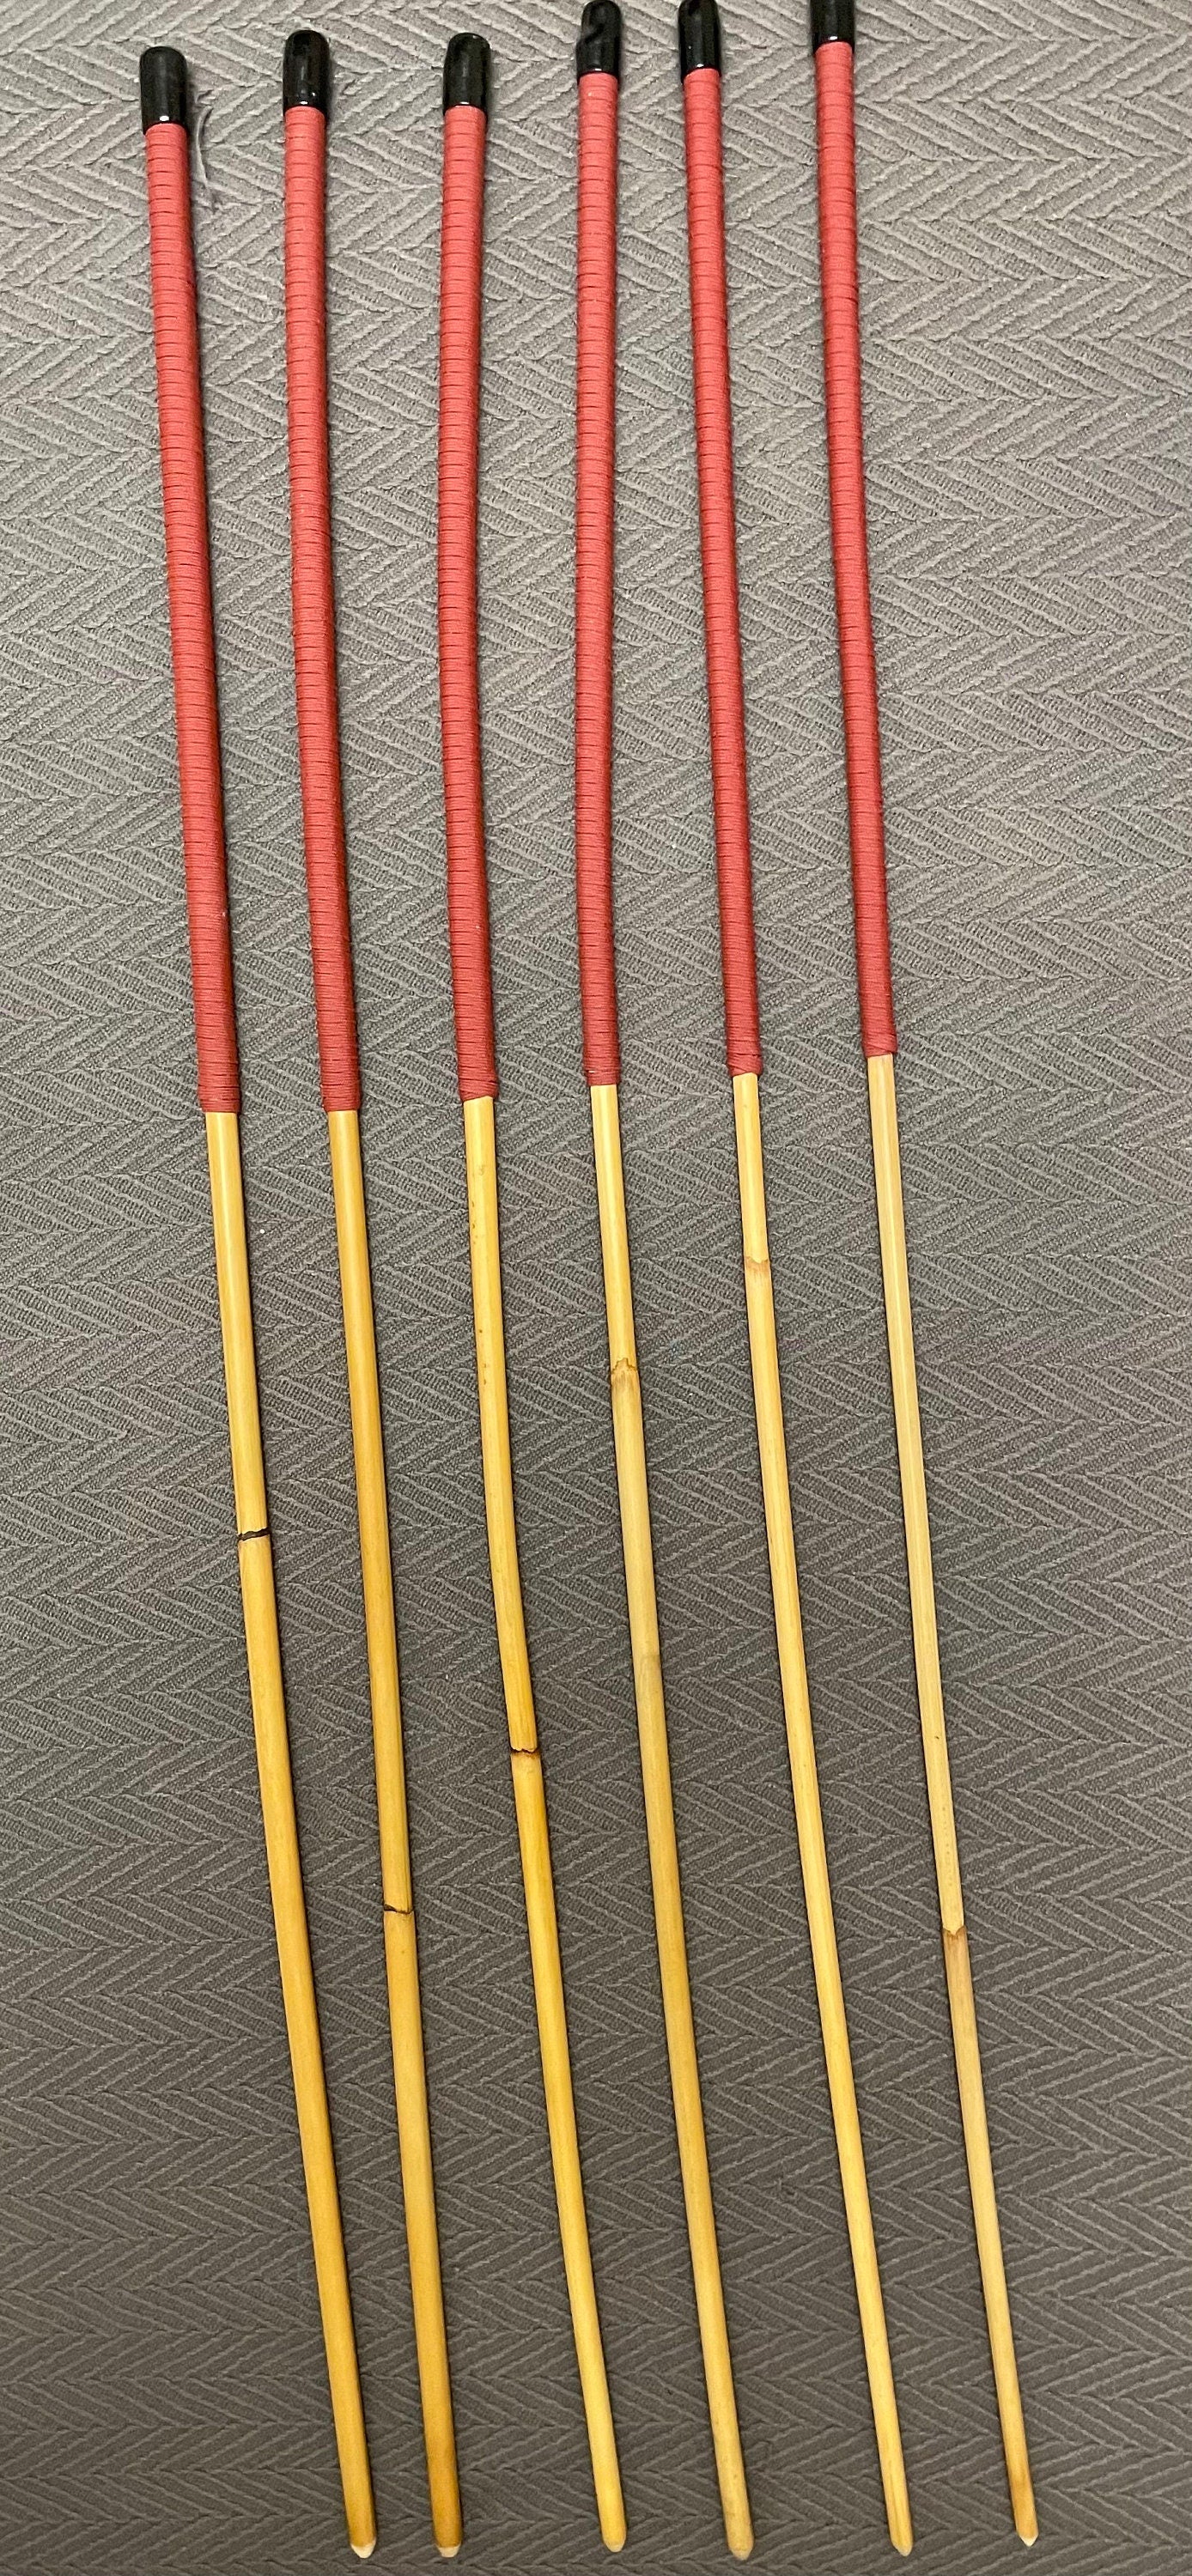 Six of the very Best Classic Dragon Rattan Punishment Cane Set  - 95 cms Length - Red Paracord Handles